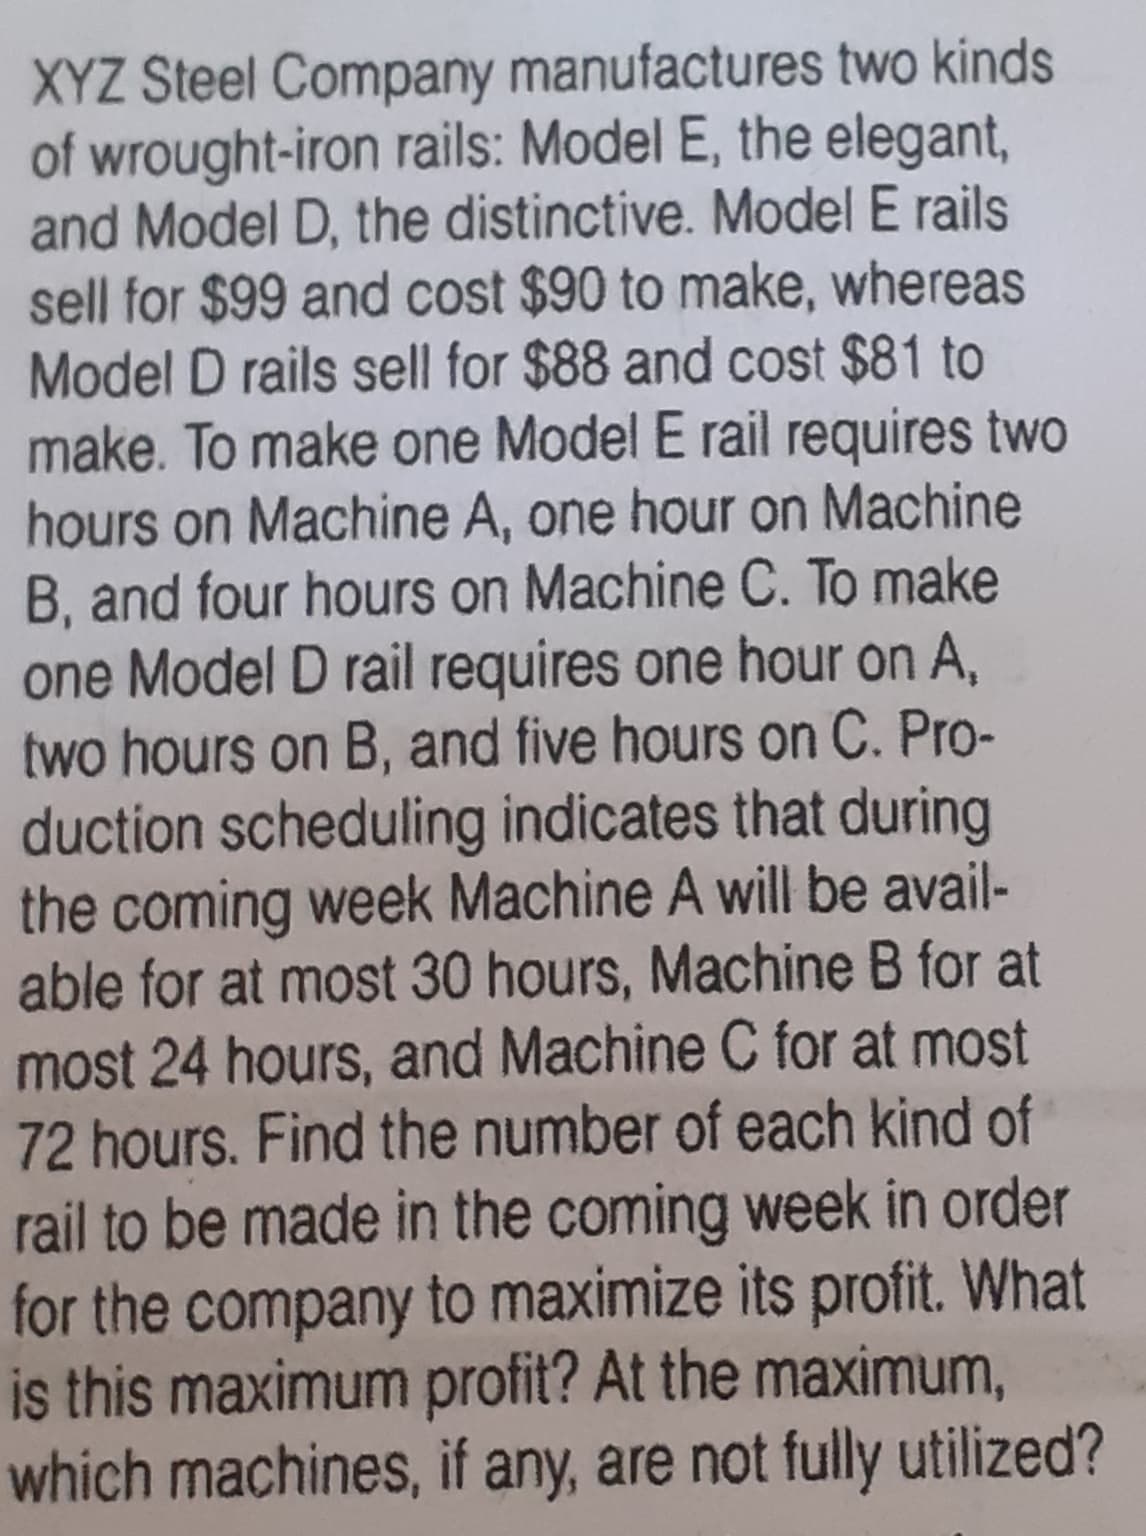 XYZ Steel Company manufactures two kinds
of wrought-iron rails: Model E, the elegant,
and Model D, the distinctive. Model E rails
sell for $99 and cost $90 to make, whereas
Model D rails sell for $88 and cost $81 to
make. To make one Model E rail requires two
hours on Machine A, one hour on Machine
B, and four hours on Machine C. To make
one Model D rail requires one hour on A,
two hours on B, and five hours on C. Pro-
duction scheduling indicates that during
the coming week Machine A will be avail-
able for at most 30 hours, Machine B for at
most 24 hours, and Machine C for at most
72 hours. Find the number of each kind of
rail to be made in the coming week in order
for the company to maximize its profit. What
is this maximum profit? At the maximum,
which machines, if any, are not fully utilized?